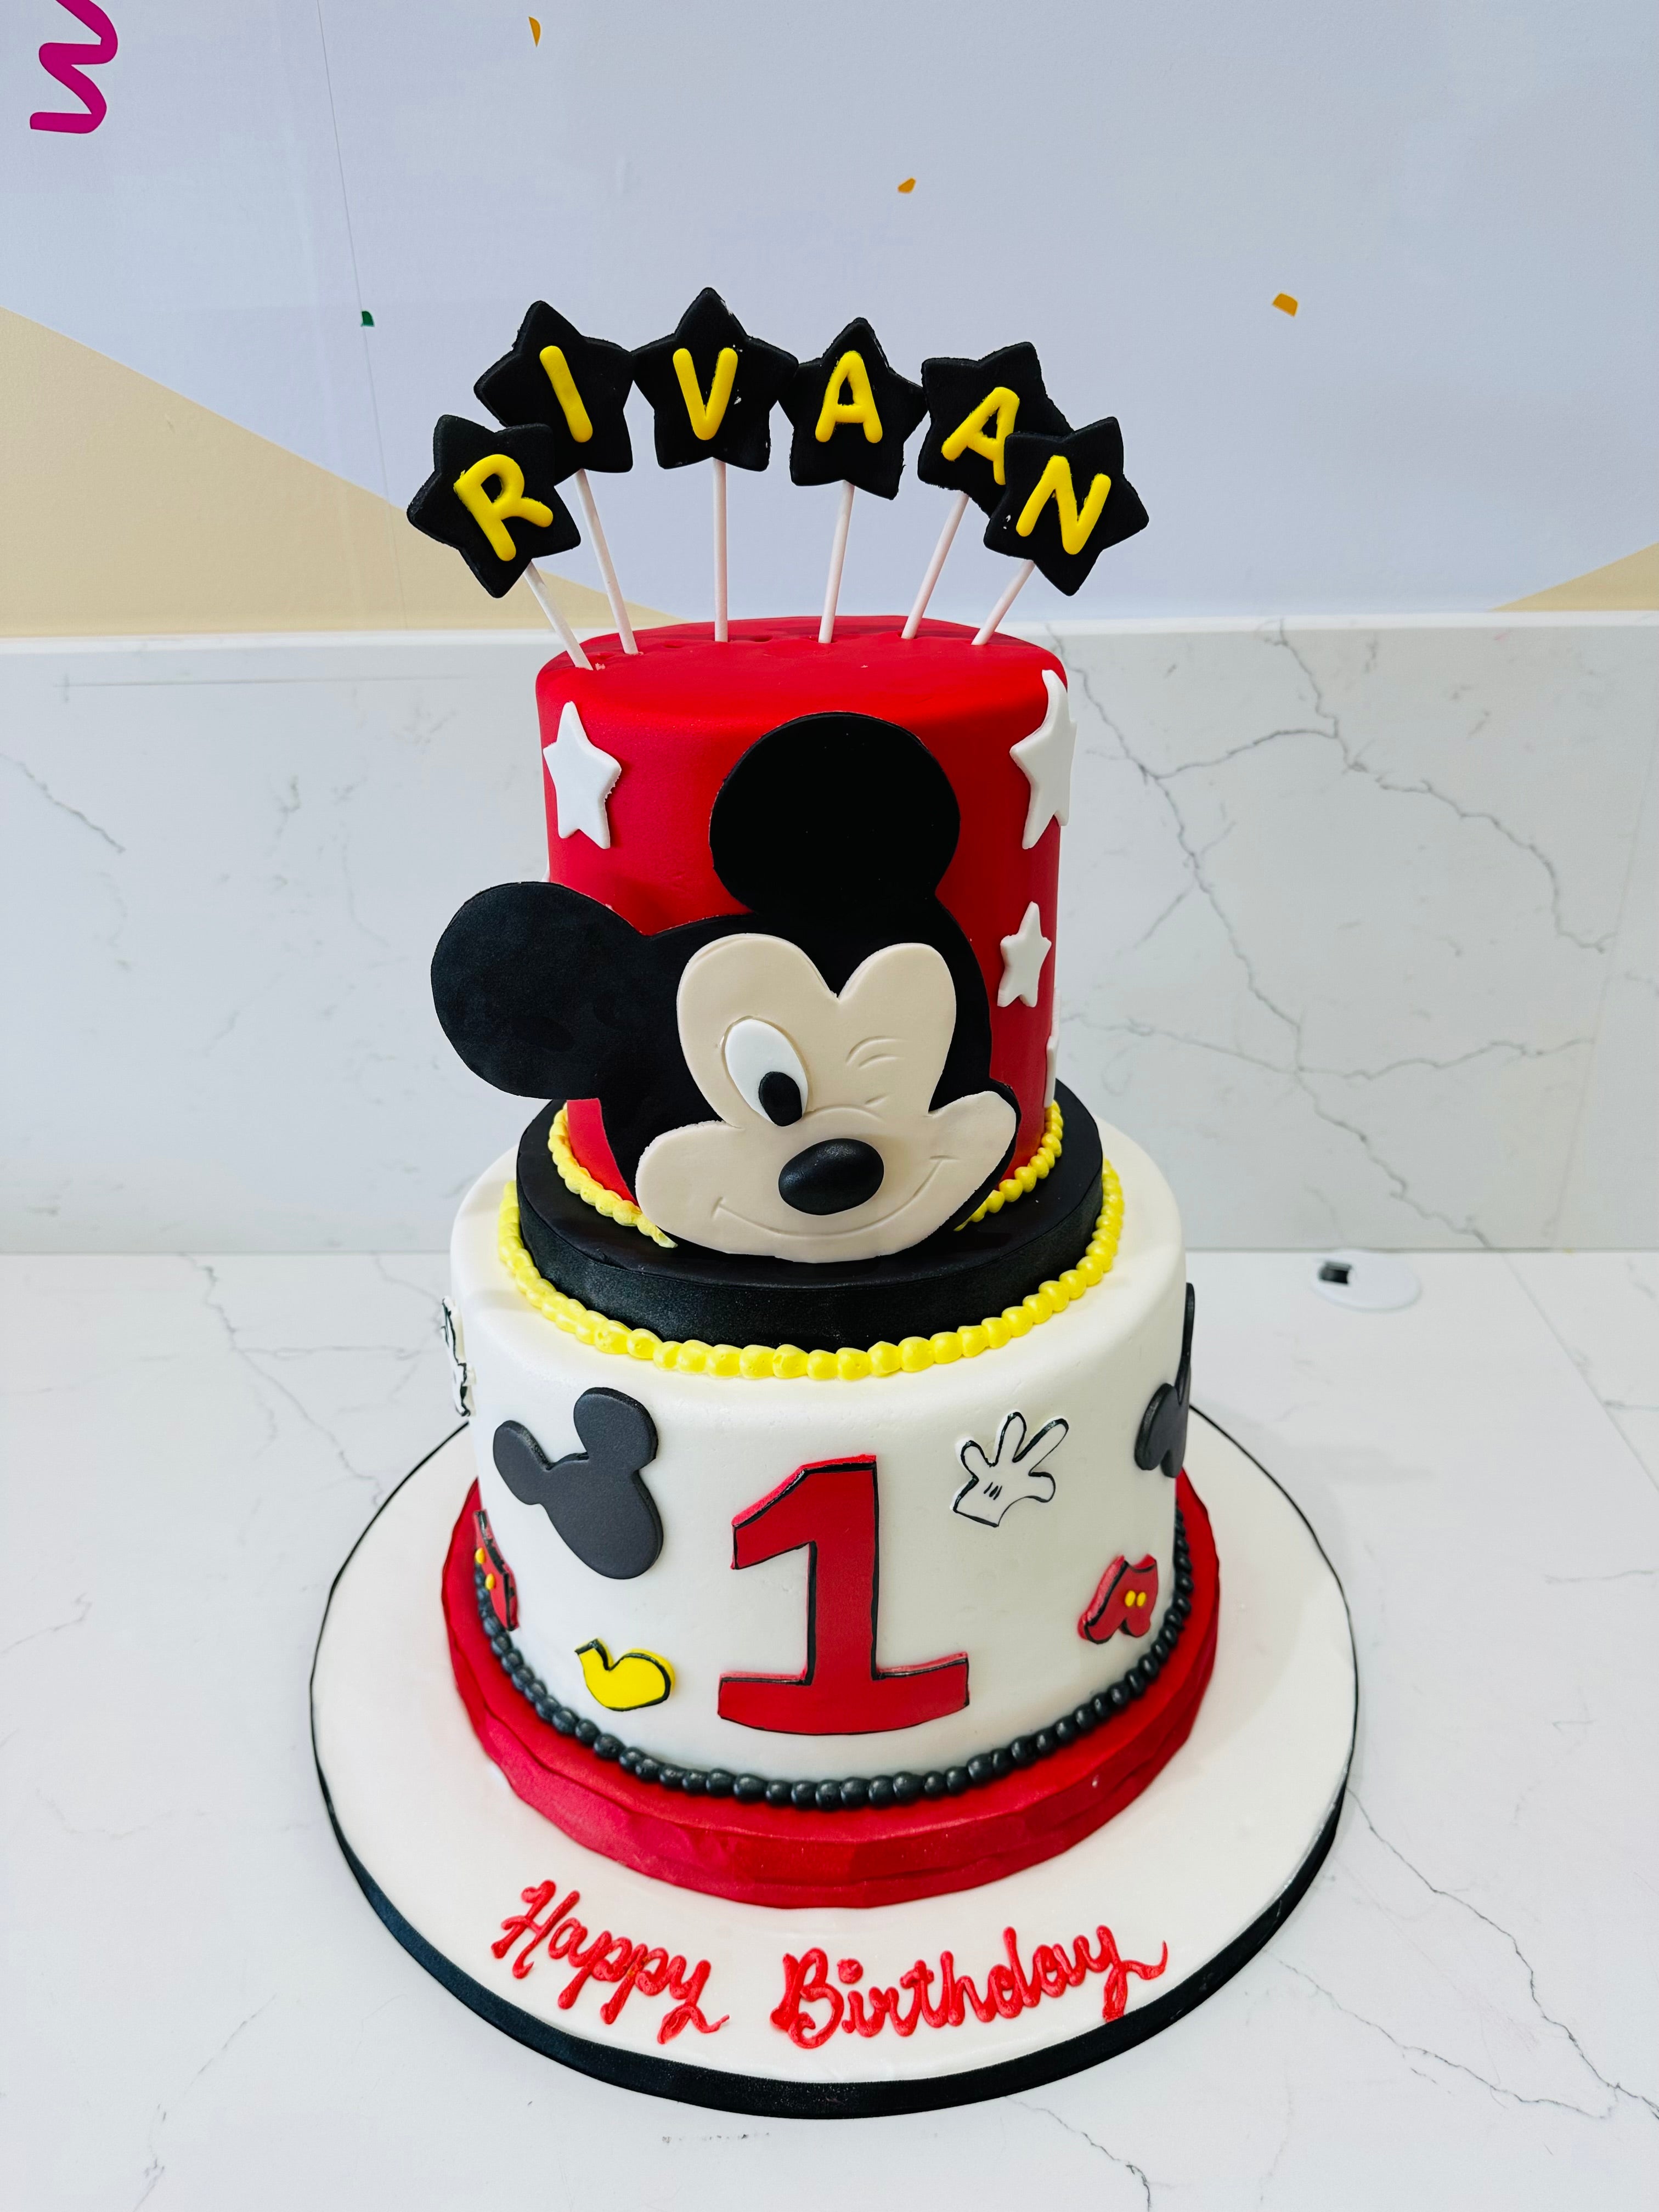 1st Birthday Cakes Archives - The Cake World Shop